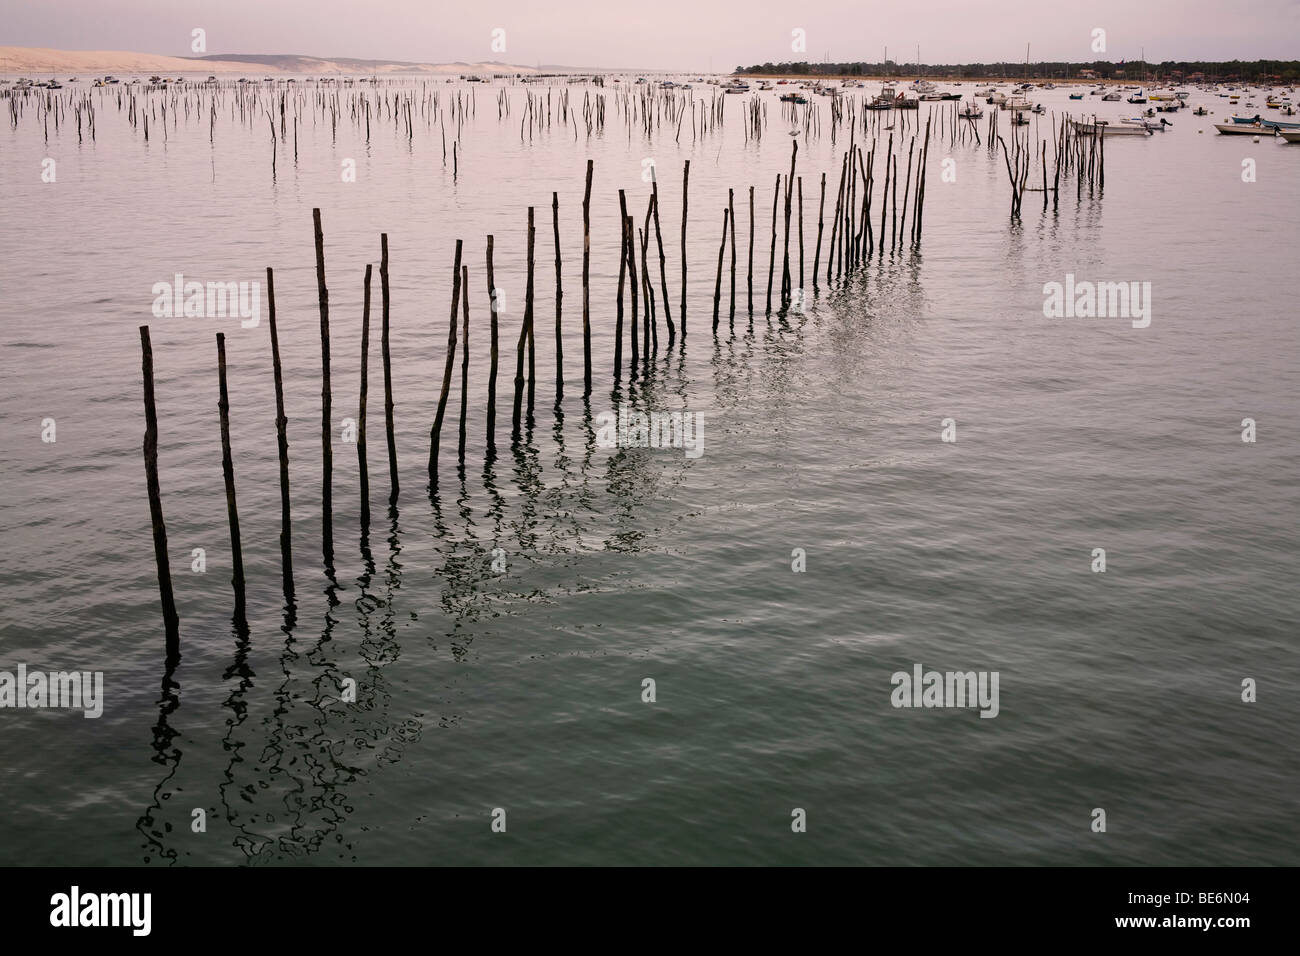 The shore front in Cap Ferret on Bassin d'Arcachon (Arcachon Bay) showing poles in the water indicating oyster harvesting beds Stock Photo